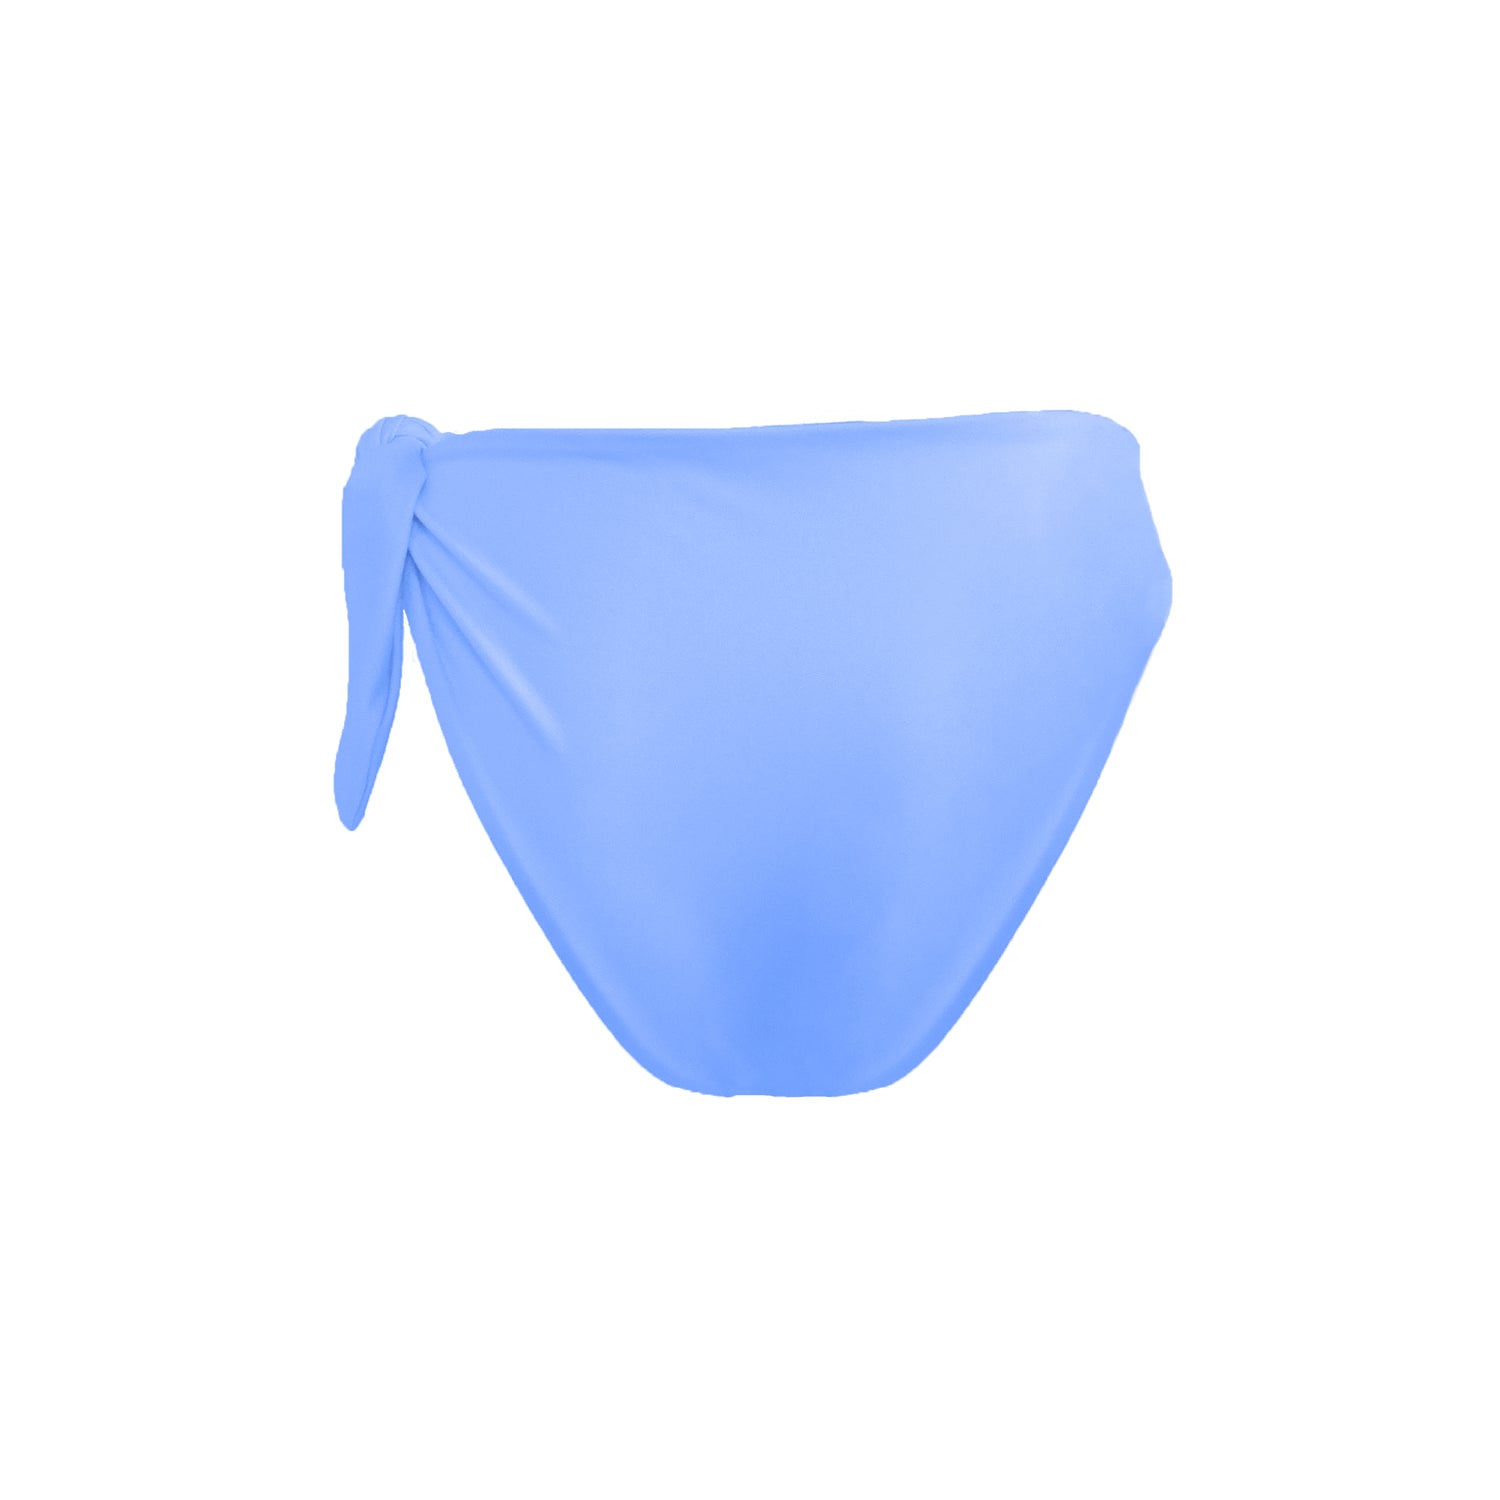 Back view of periwinkle blue Capri bikini bottom with asymmetric adjustable side tie and cheeky bum coverage.